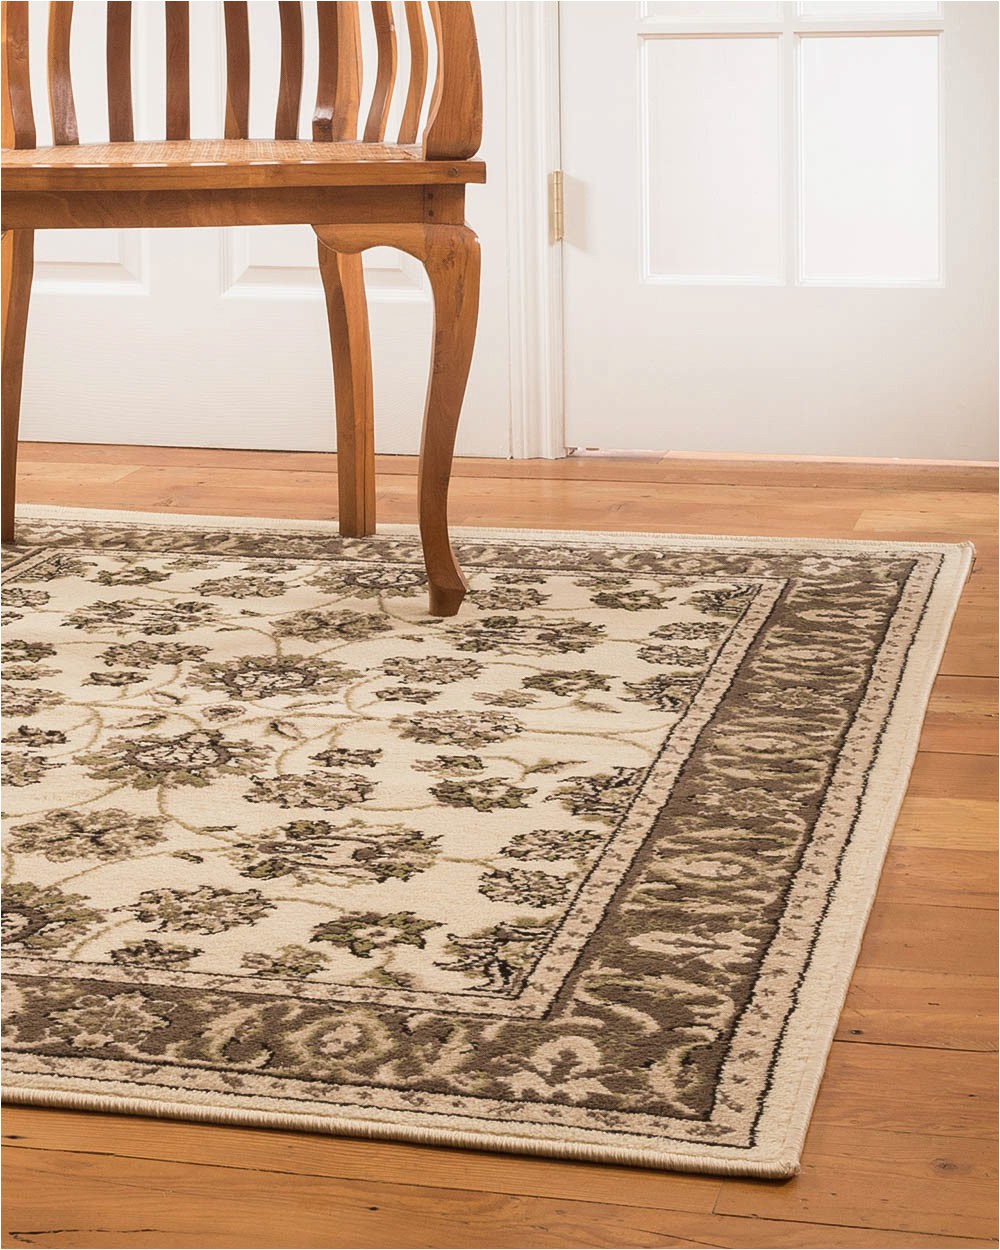 Area Rugs at Walmart Com Natural area Rugs Chastain Brown area Rug